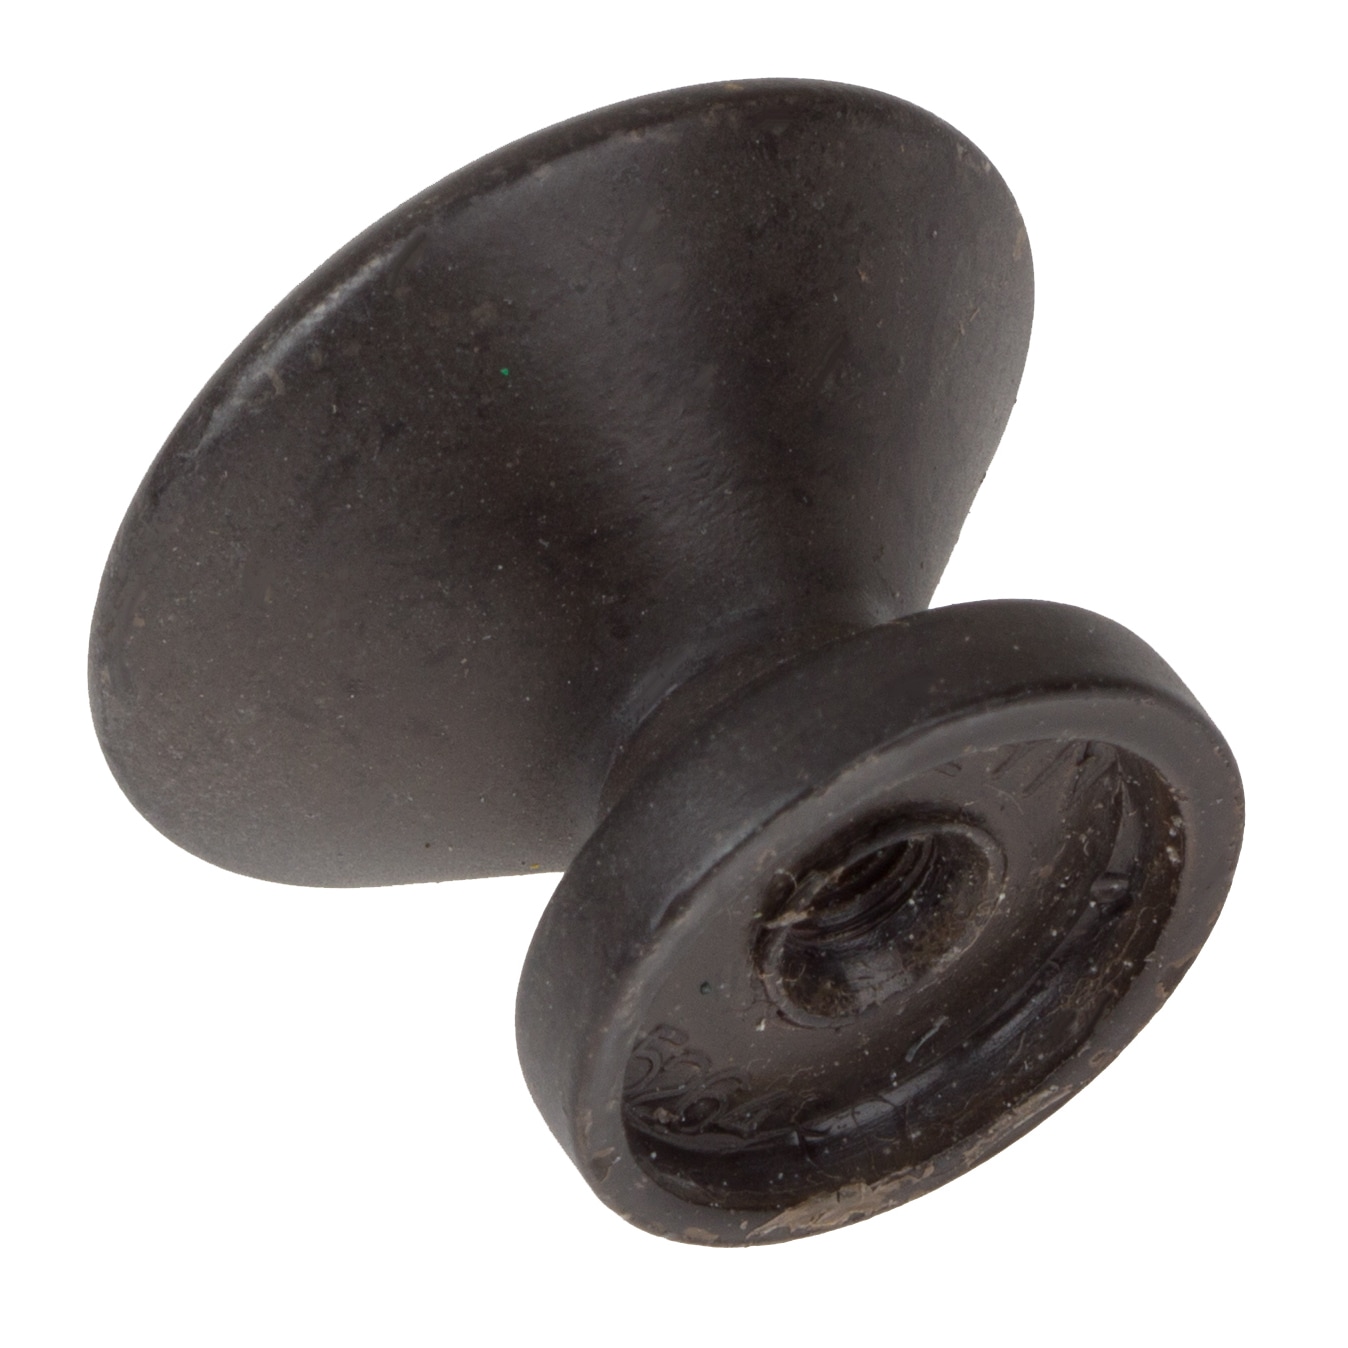 GlideRite 1 in. Classic Round Convex Cabinet Hardware Knobs, Oil Rubbed Bronze, Pack of 25 - image 5 of 5